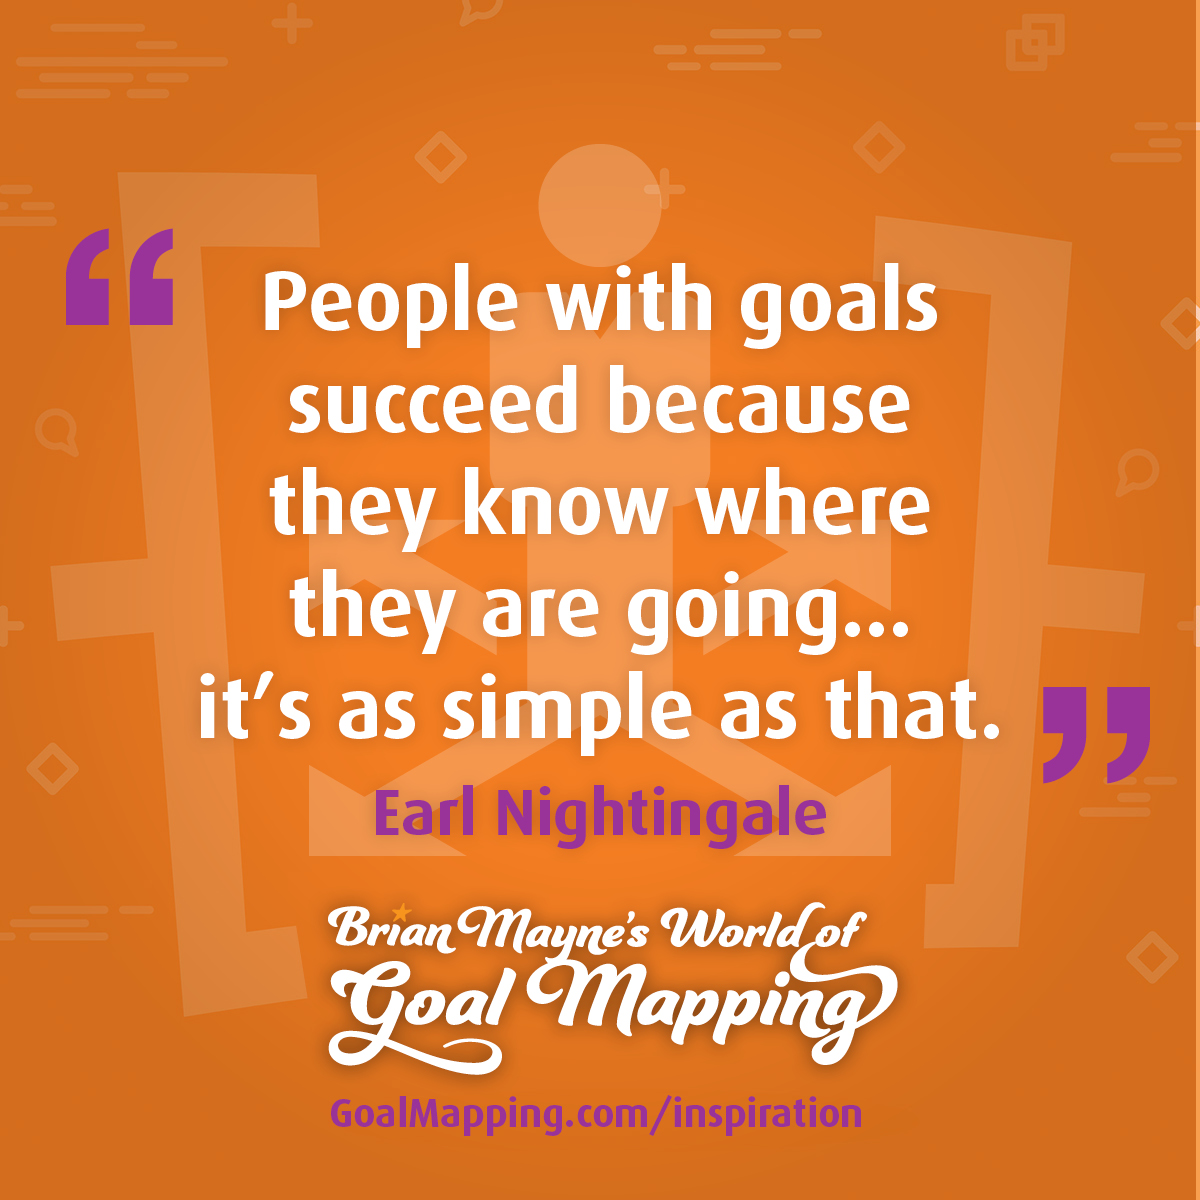 "People with goals succeed because they know where they are going... It's as simple as that." Earl Nightingale